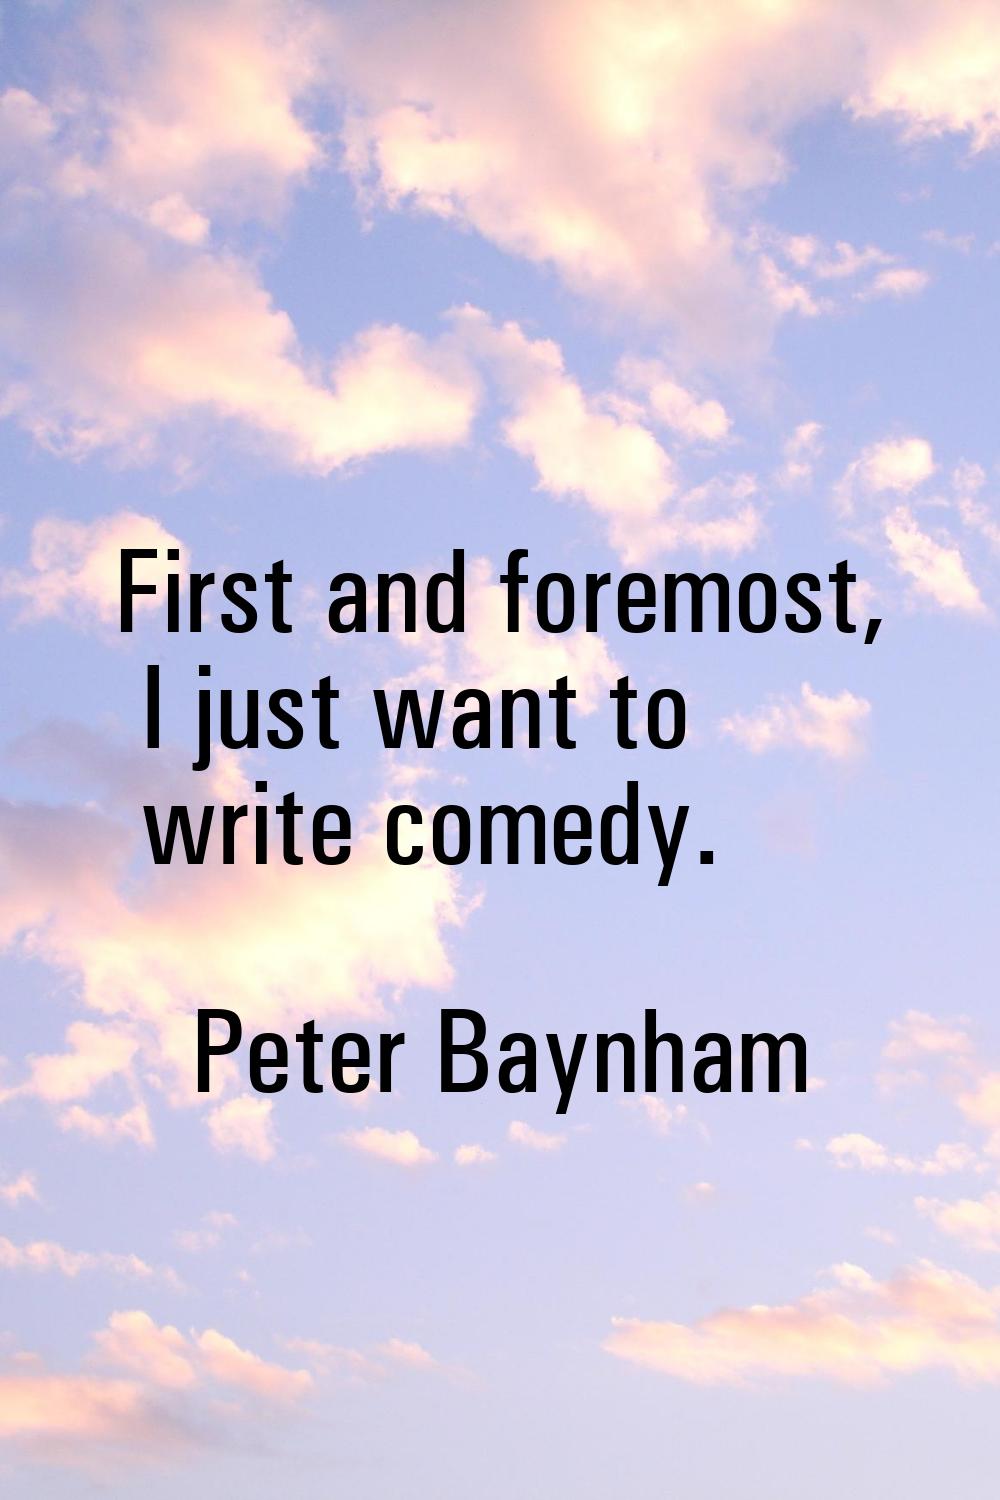 First and foremost, I just want to write comedy.